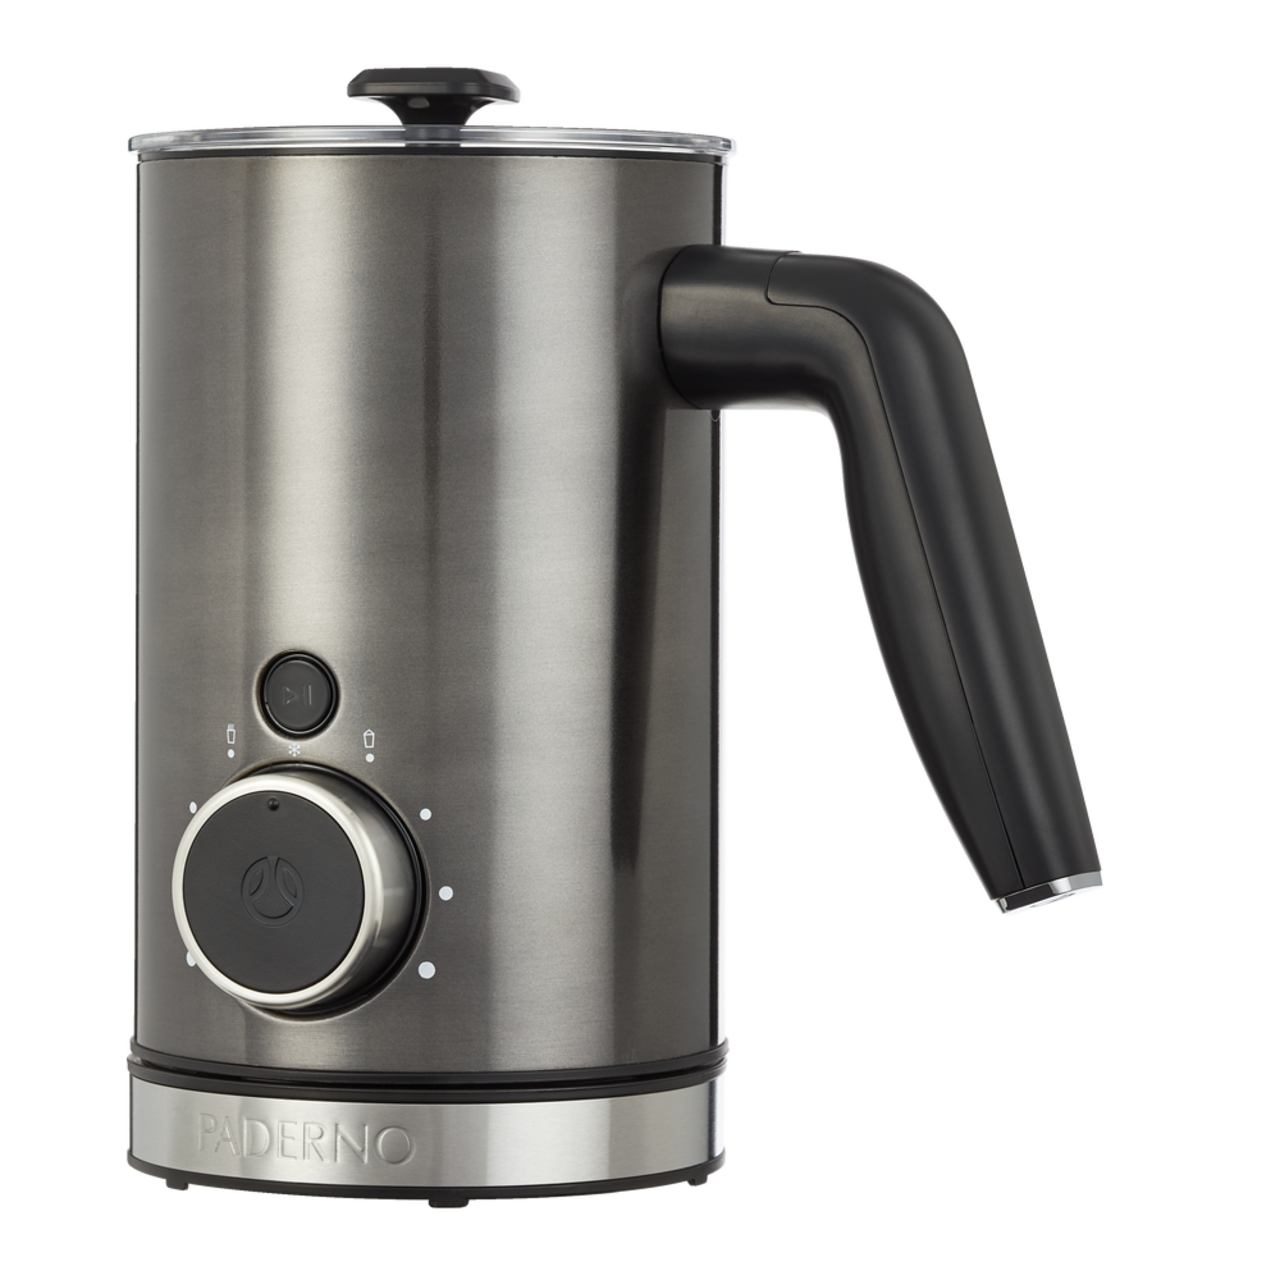 https://media-www.canadiantire.ca/product/living/kitchen/kitchen-appliances/0432735/paderno-milk-frother-cf45517d-1103-42ad-9692-e5afe2f1e977.png?imdensity=1&imwidth=1244&impolicy=mZoom